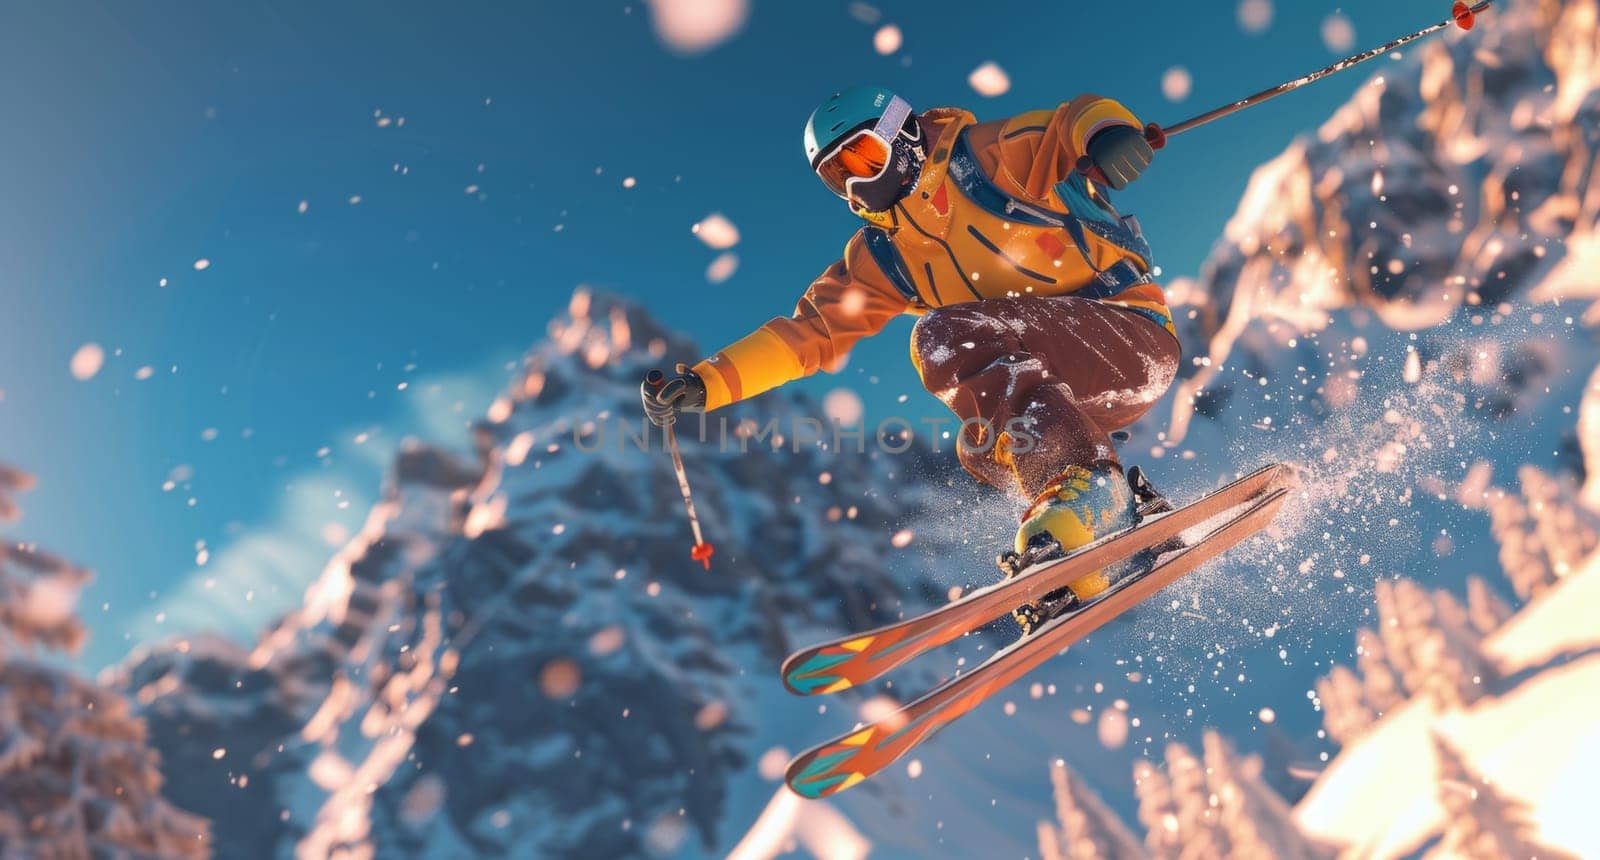 A man or woman is skiing down a mountain jumping with the skis in the air.